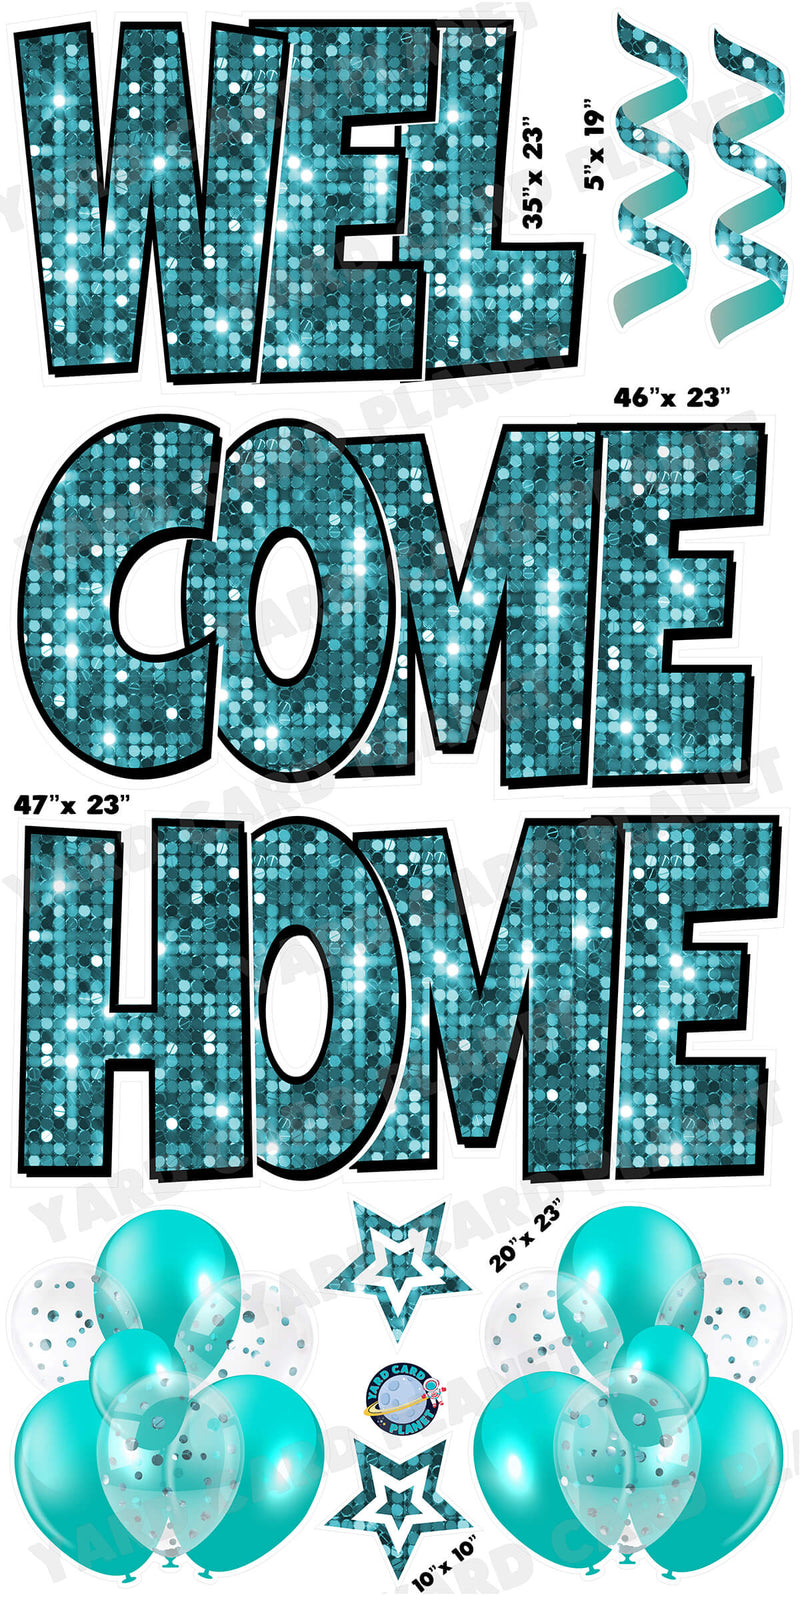 Large 23" Welcome Home Yard Card EZ Quick Sets in Luckiest Guy Font and Flair in Teal Sequin Pattern